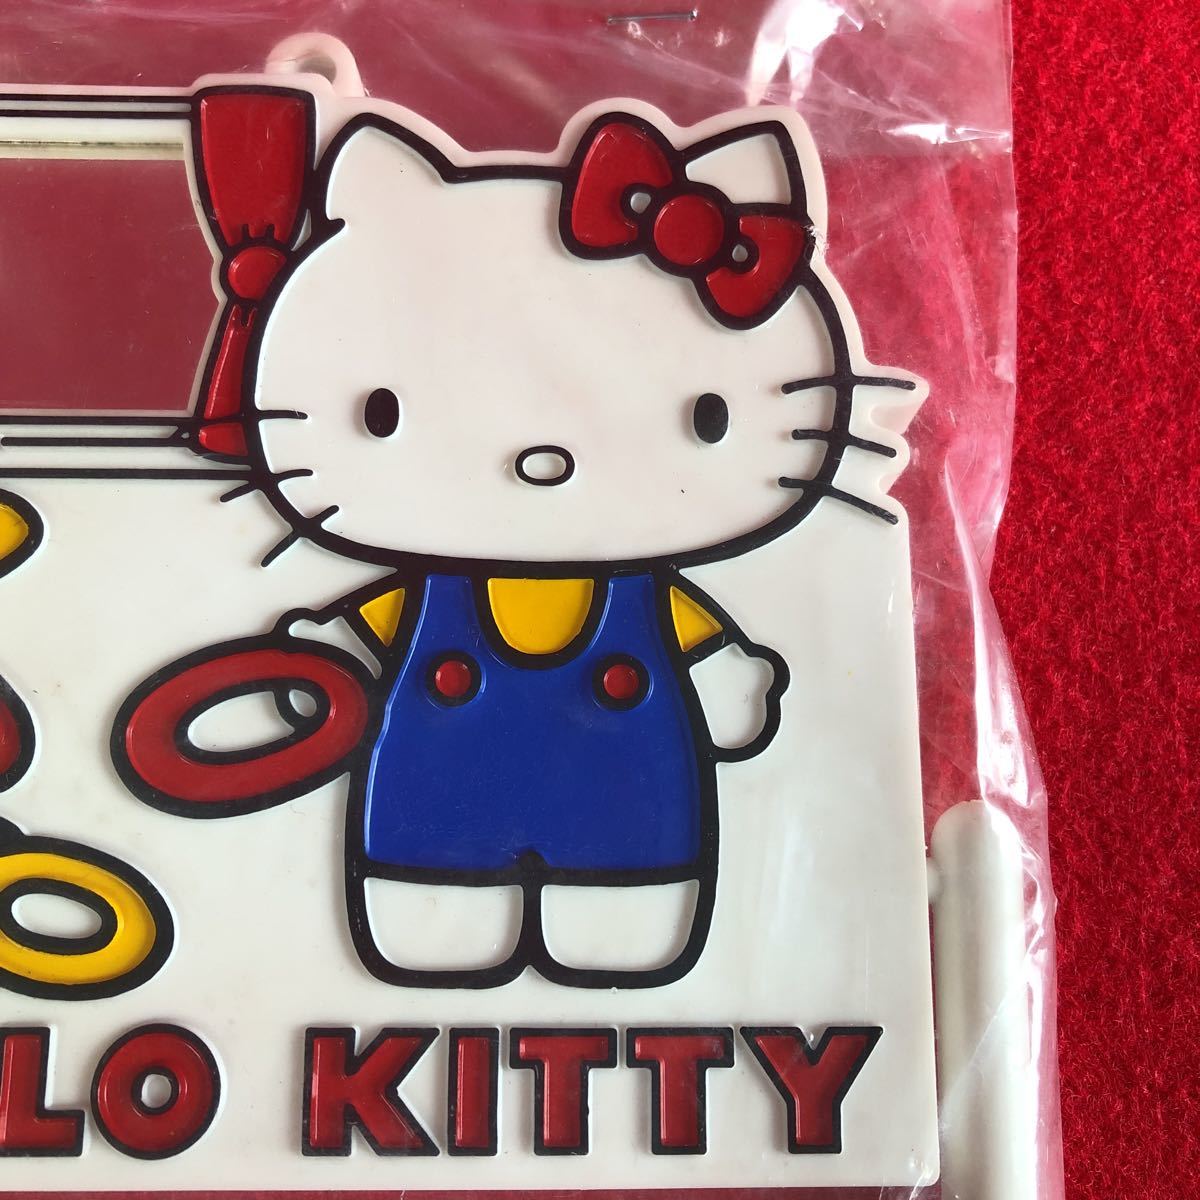  prompt decision * Kitty * towel hanger *1976 year * Showa Retro that time thing old Logo * unused storage goods ⑥